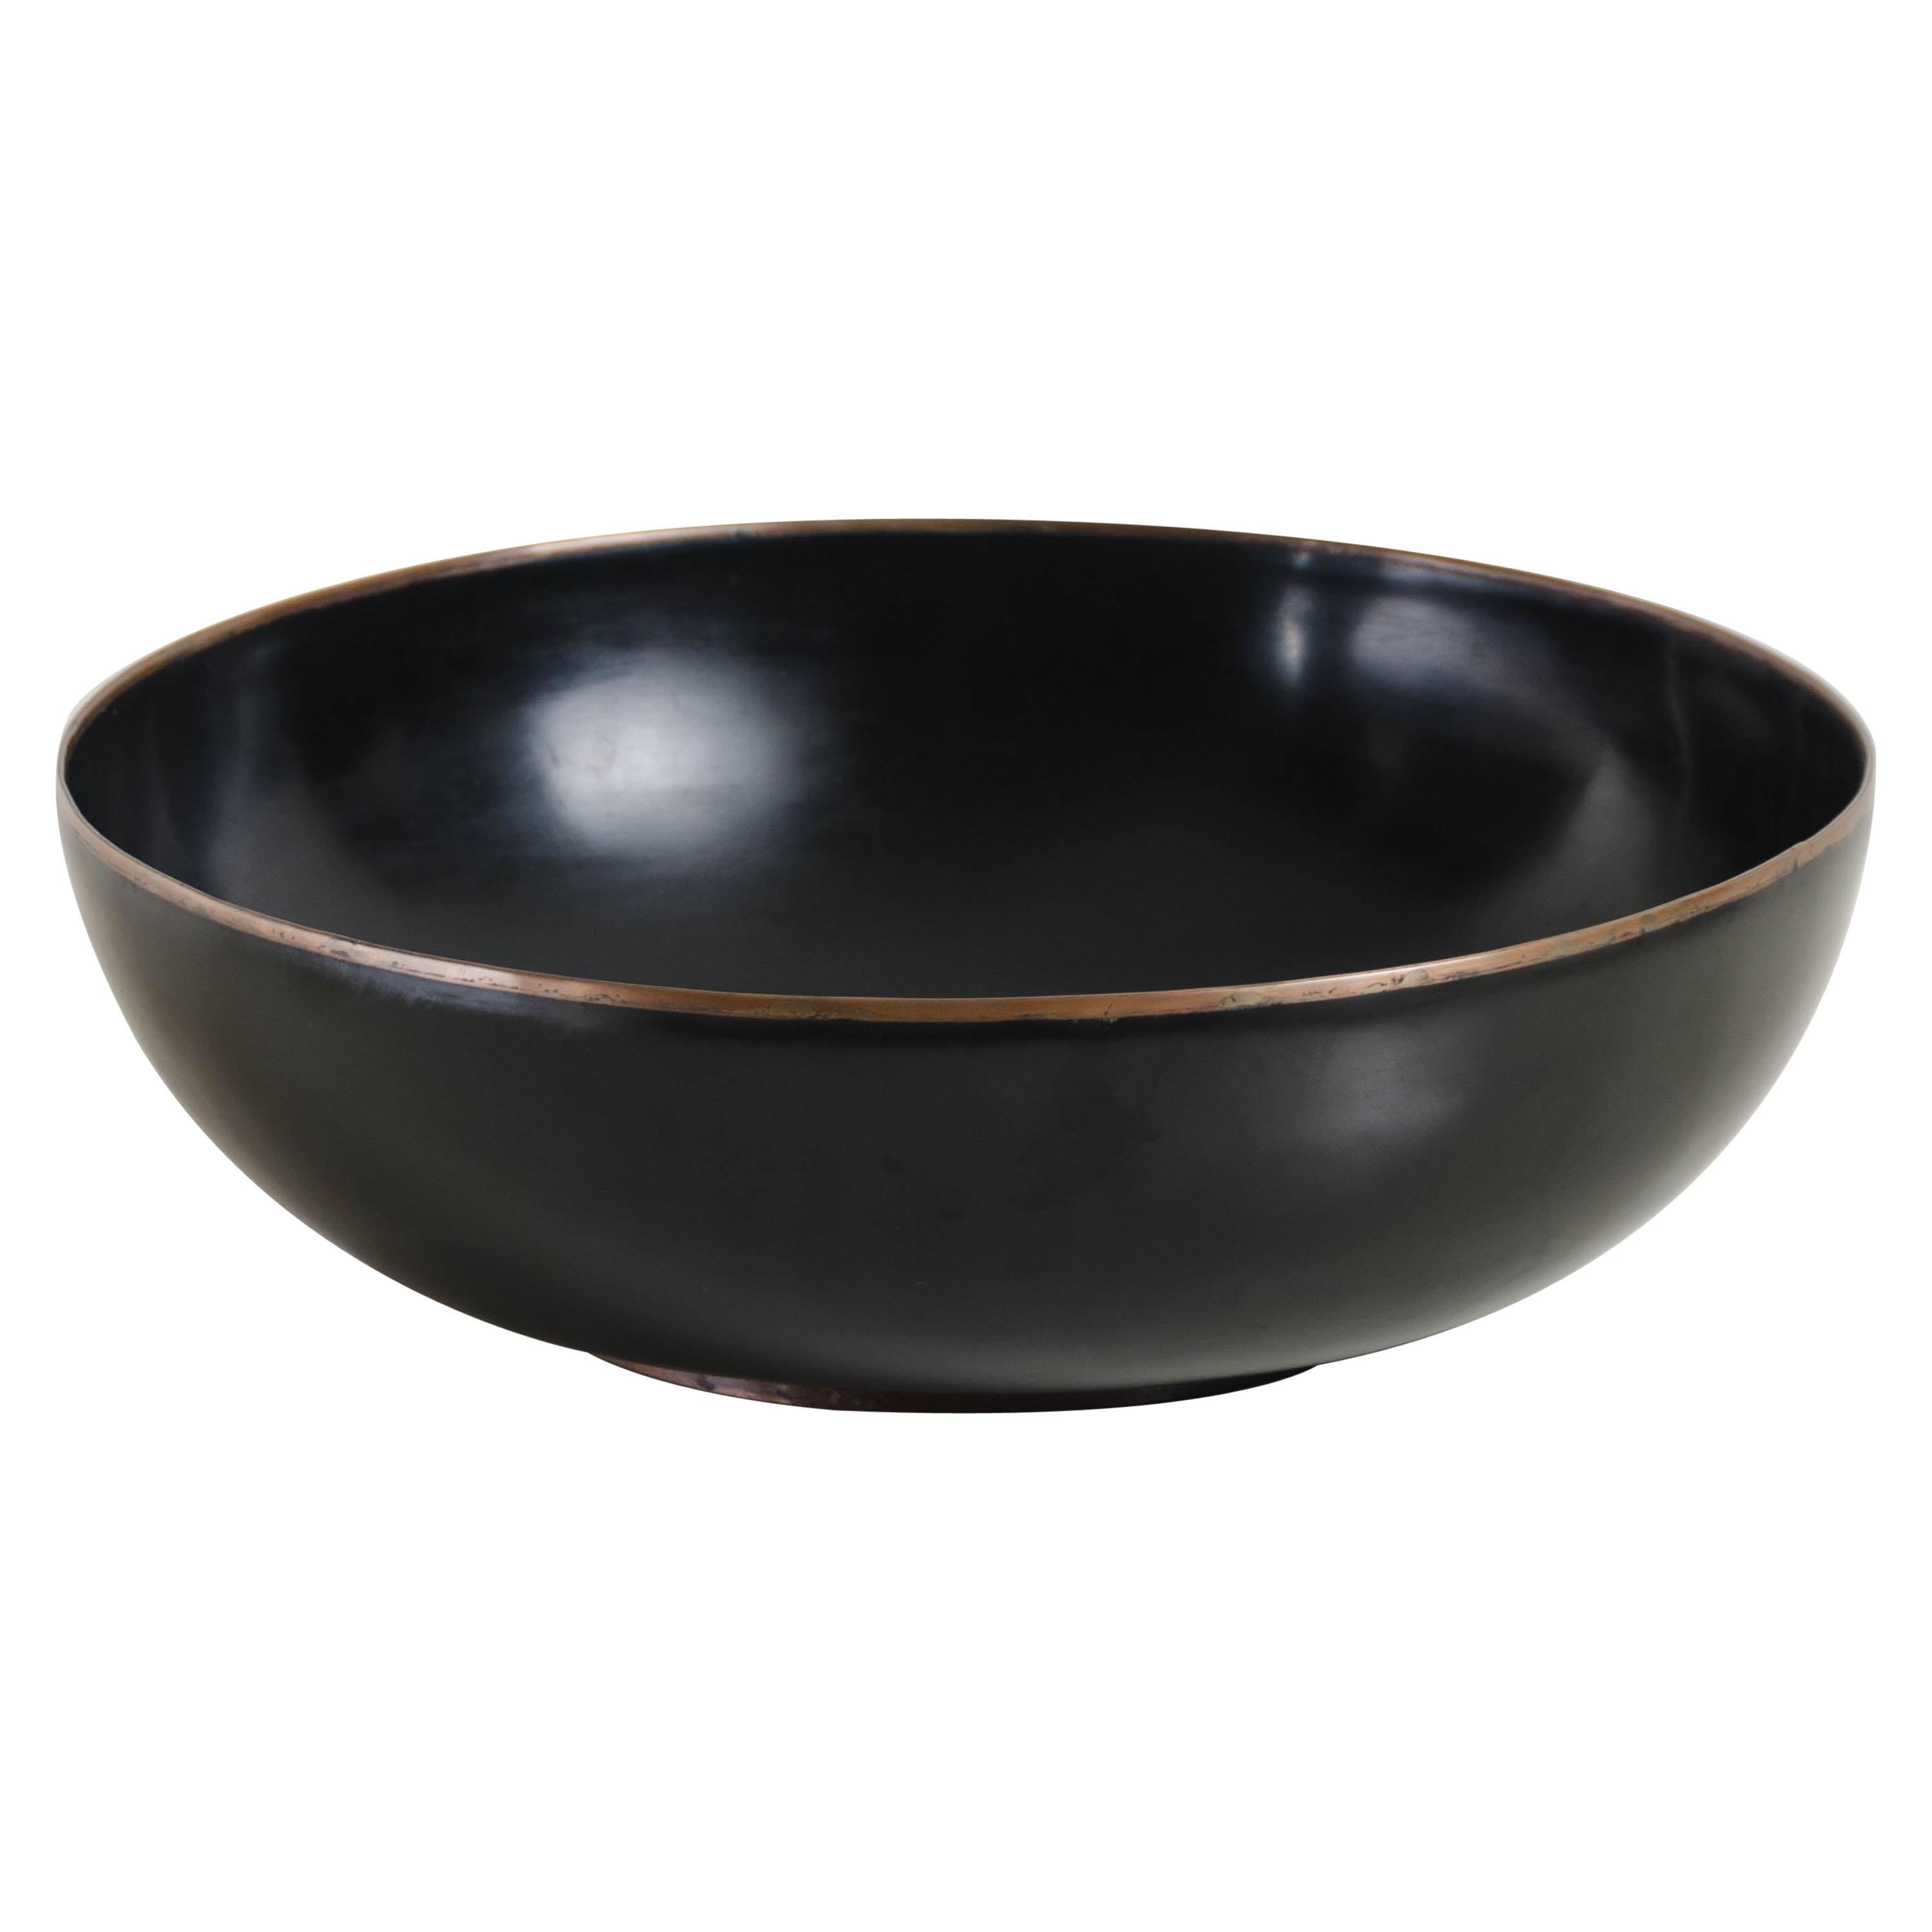 Contemporary Black Lacquer Shallow Bowl w/ Copper Rim by Robert Kuo For Sale